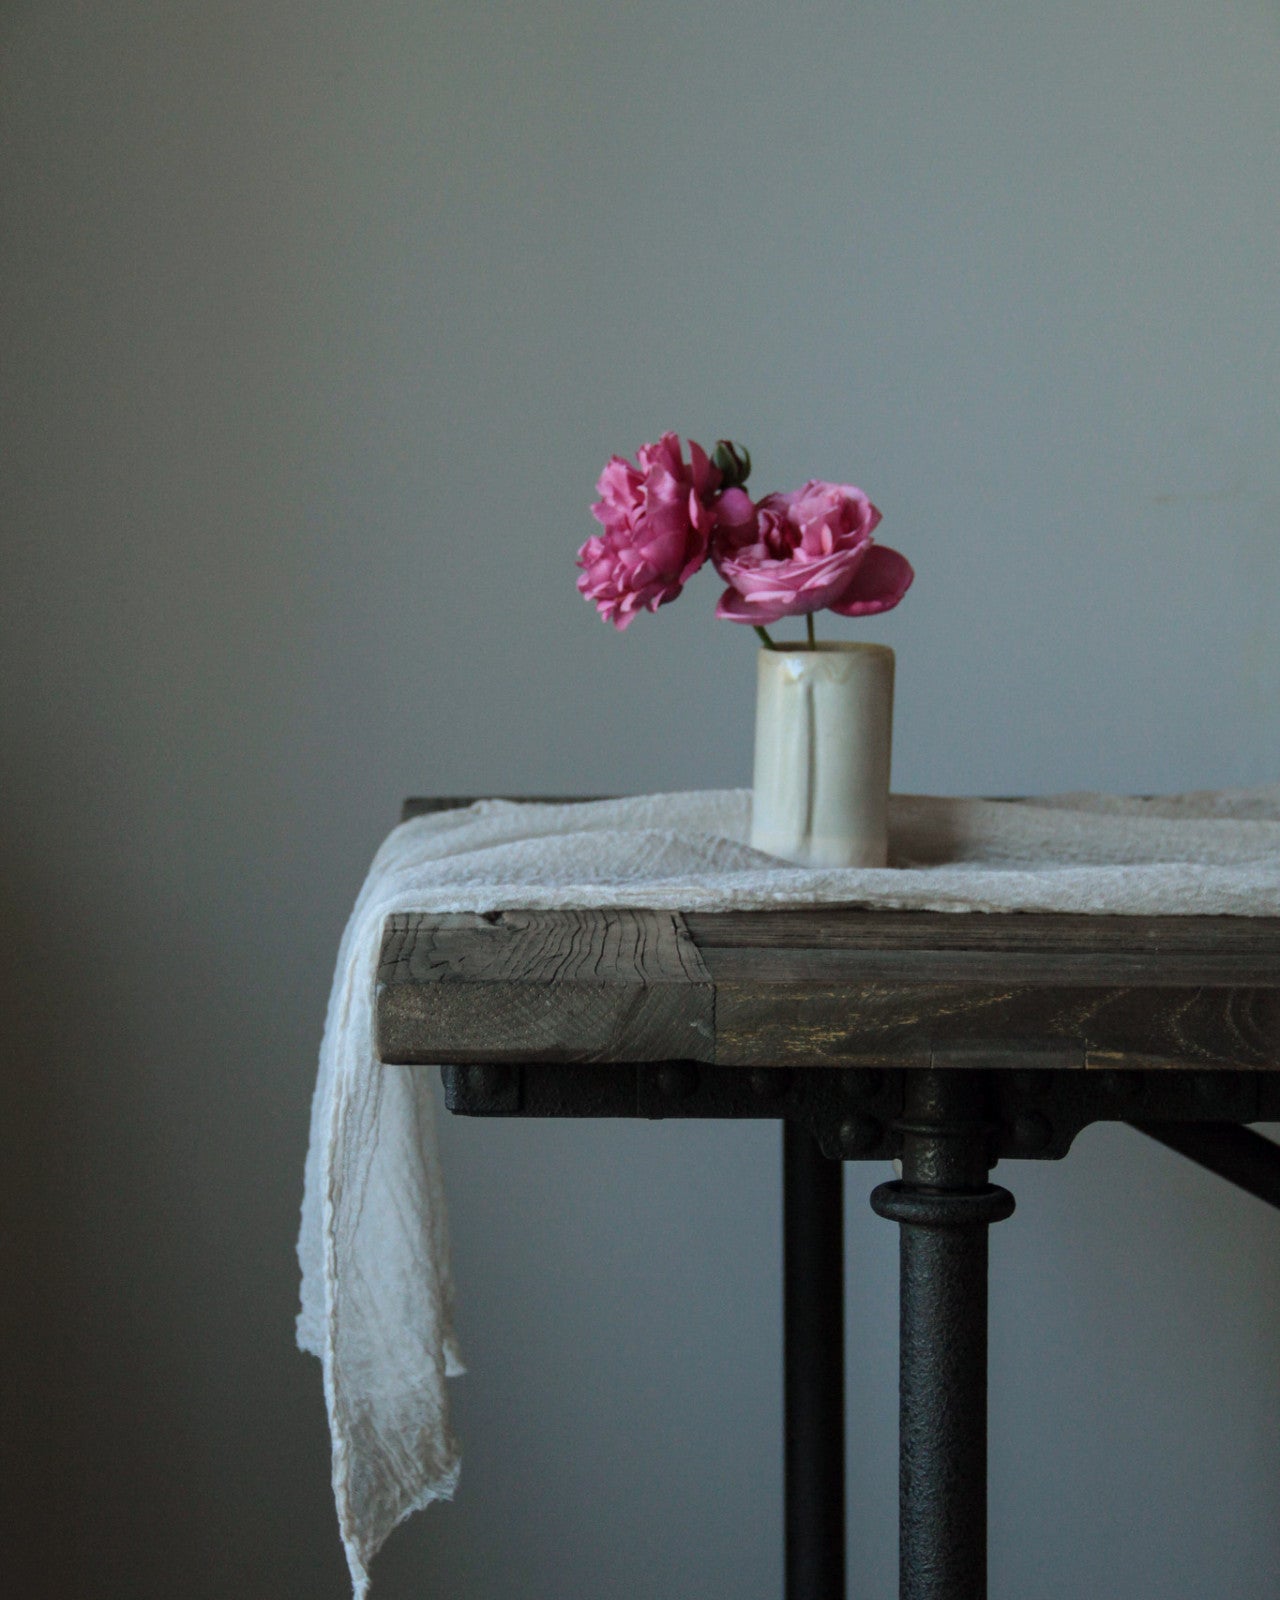 Silk and willow white table runner on a restoration hardware table and a vase with pink roses